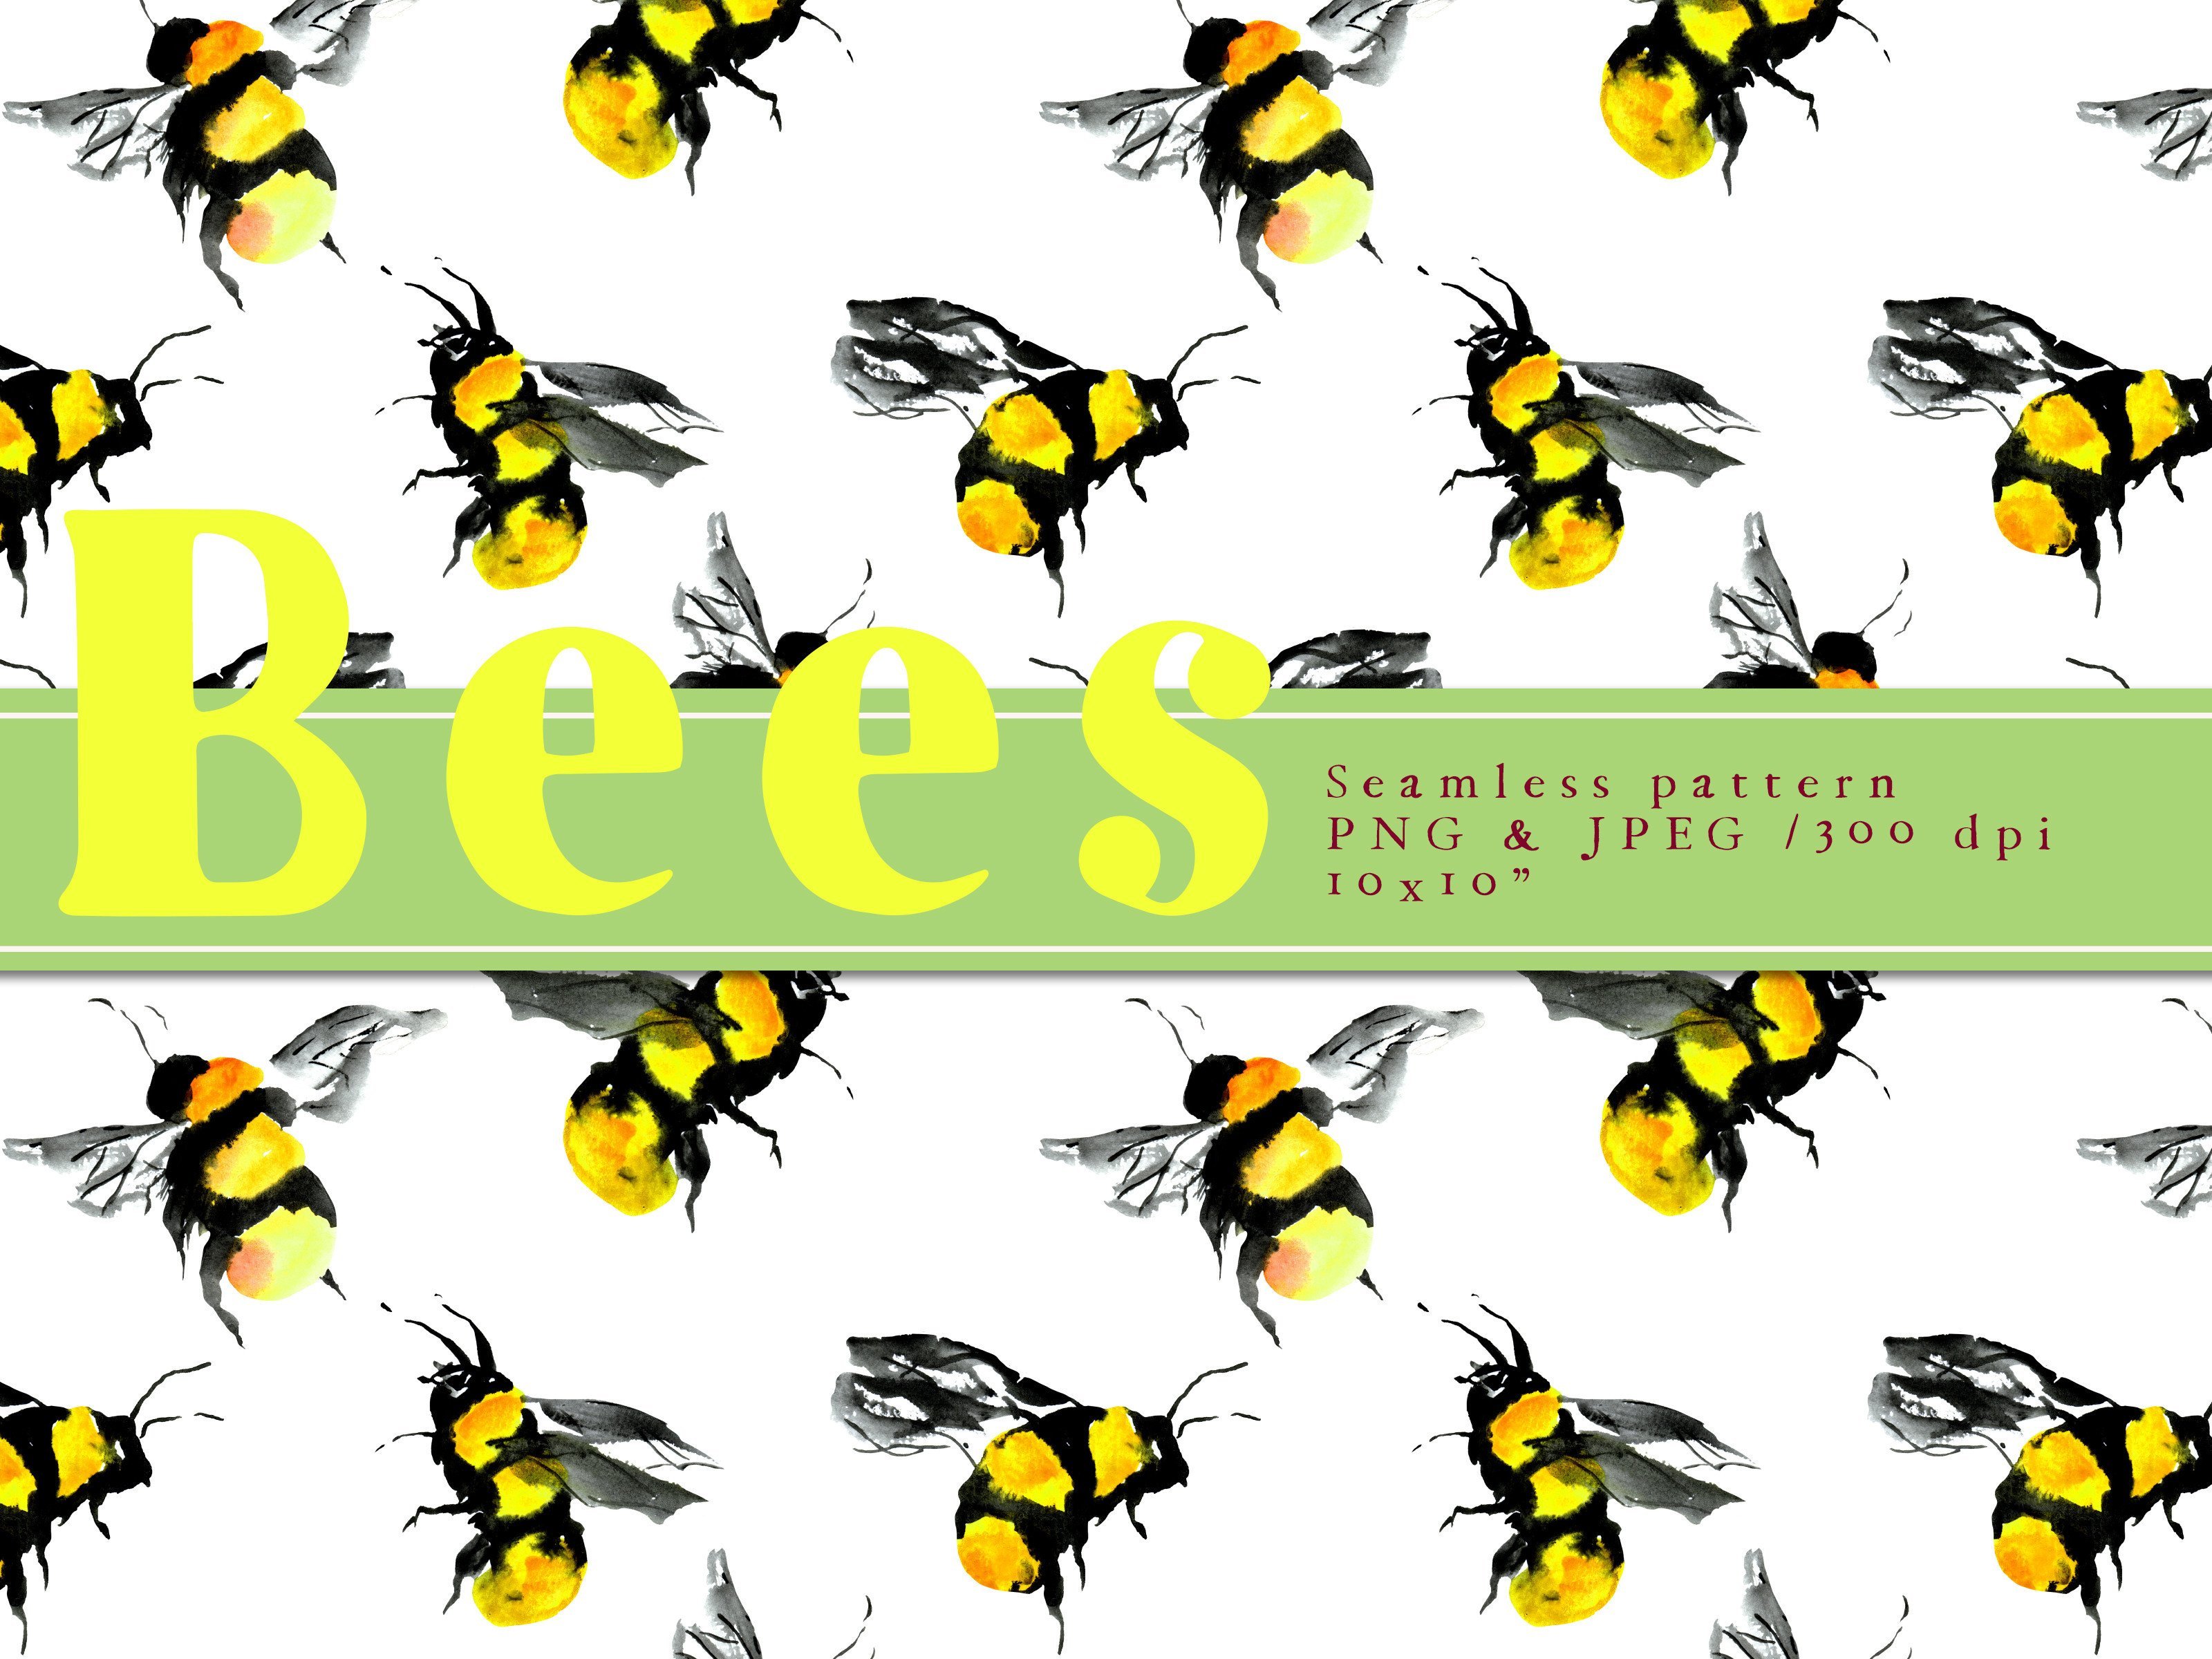 Bees Seamless Pattern cover image.